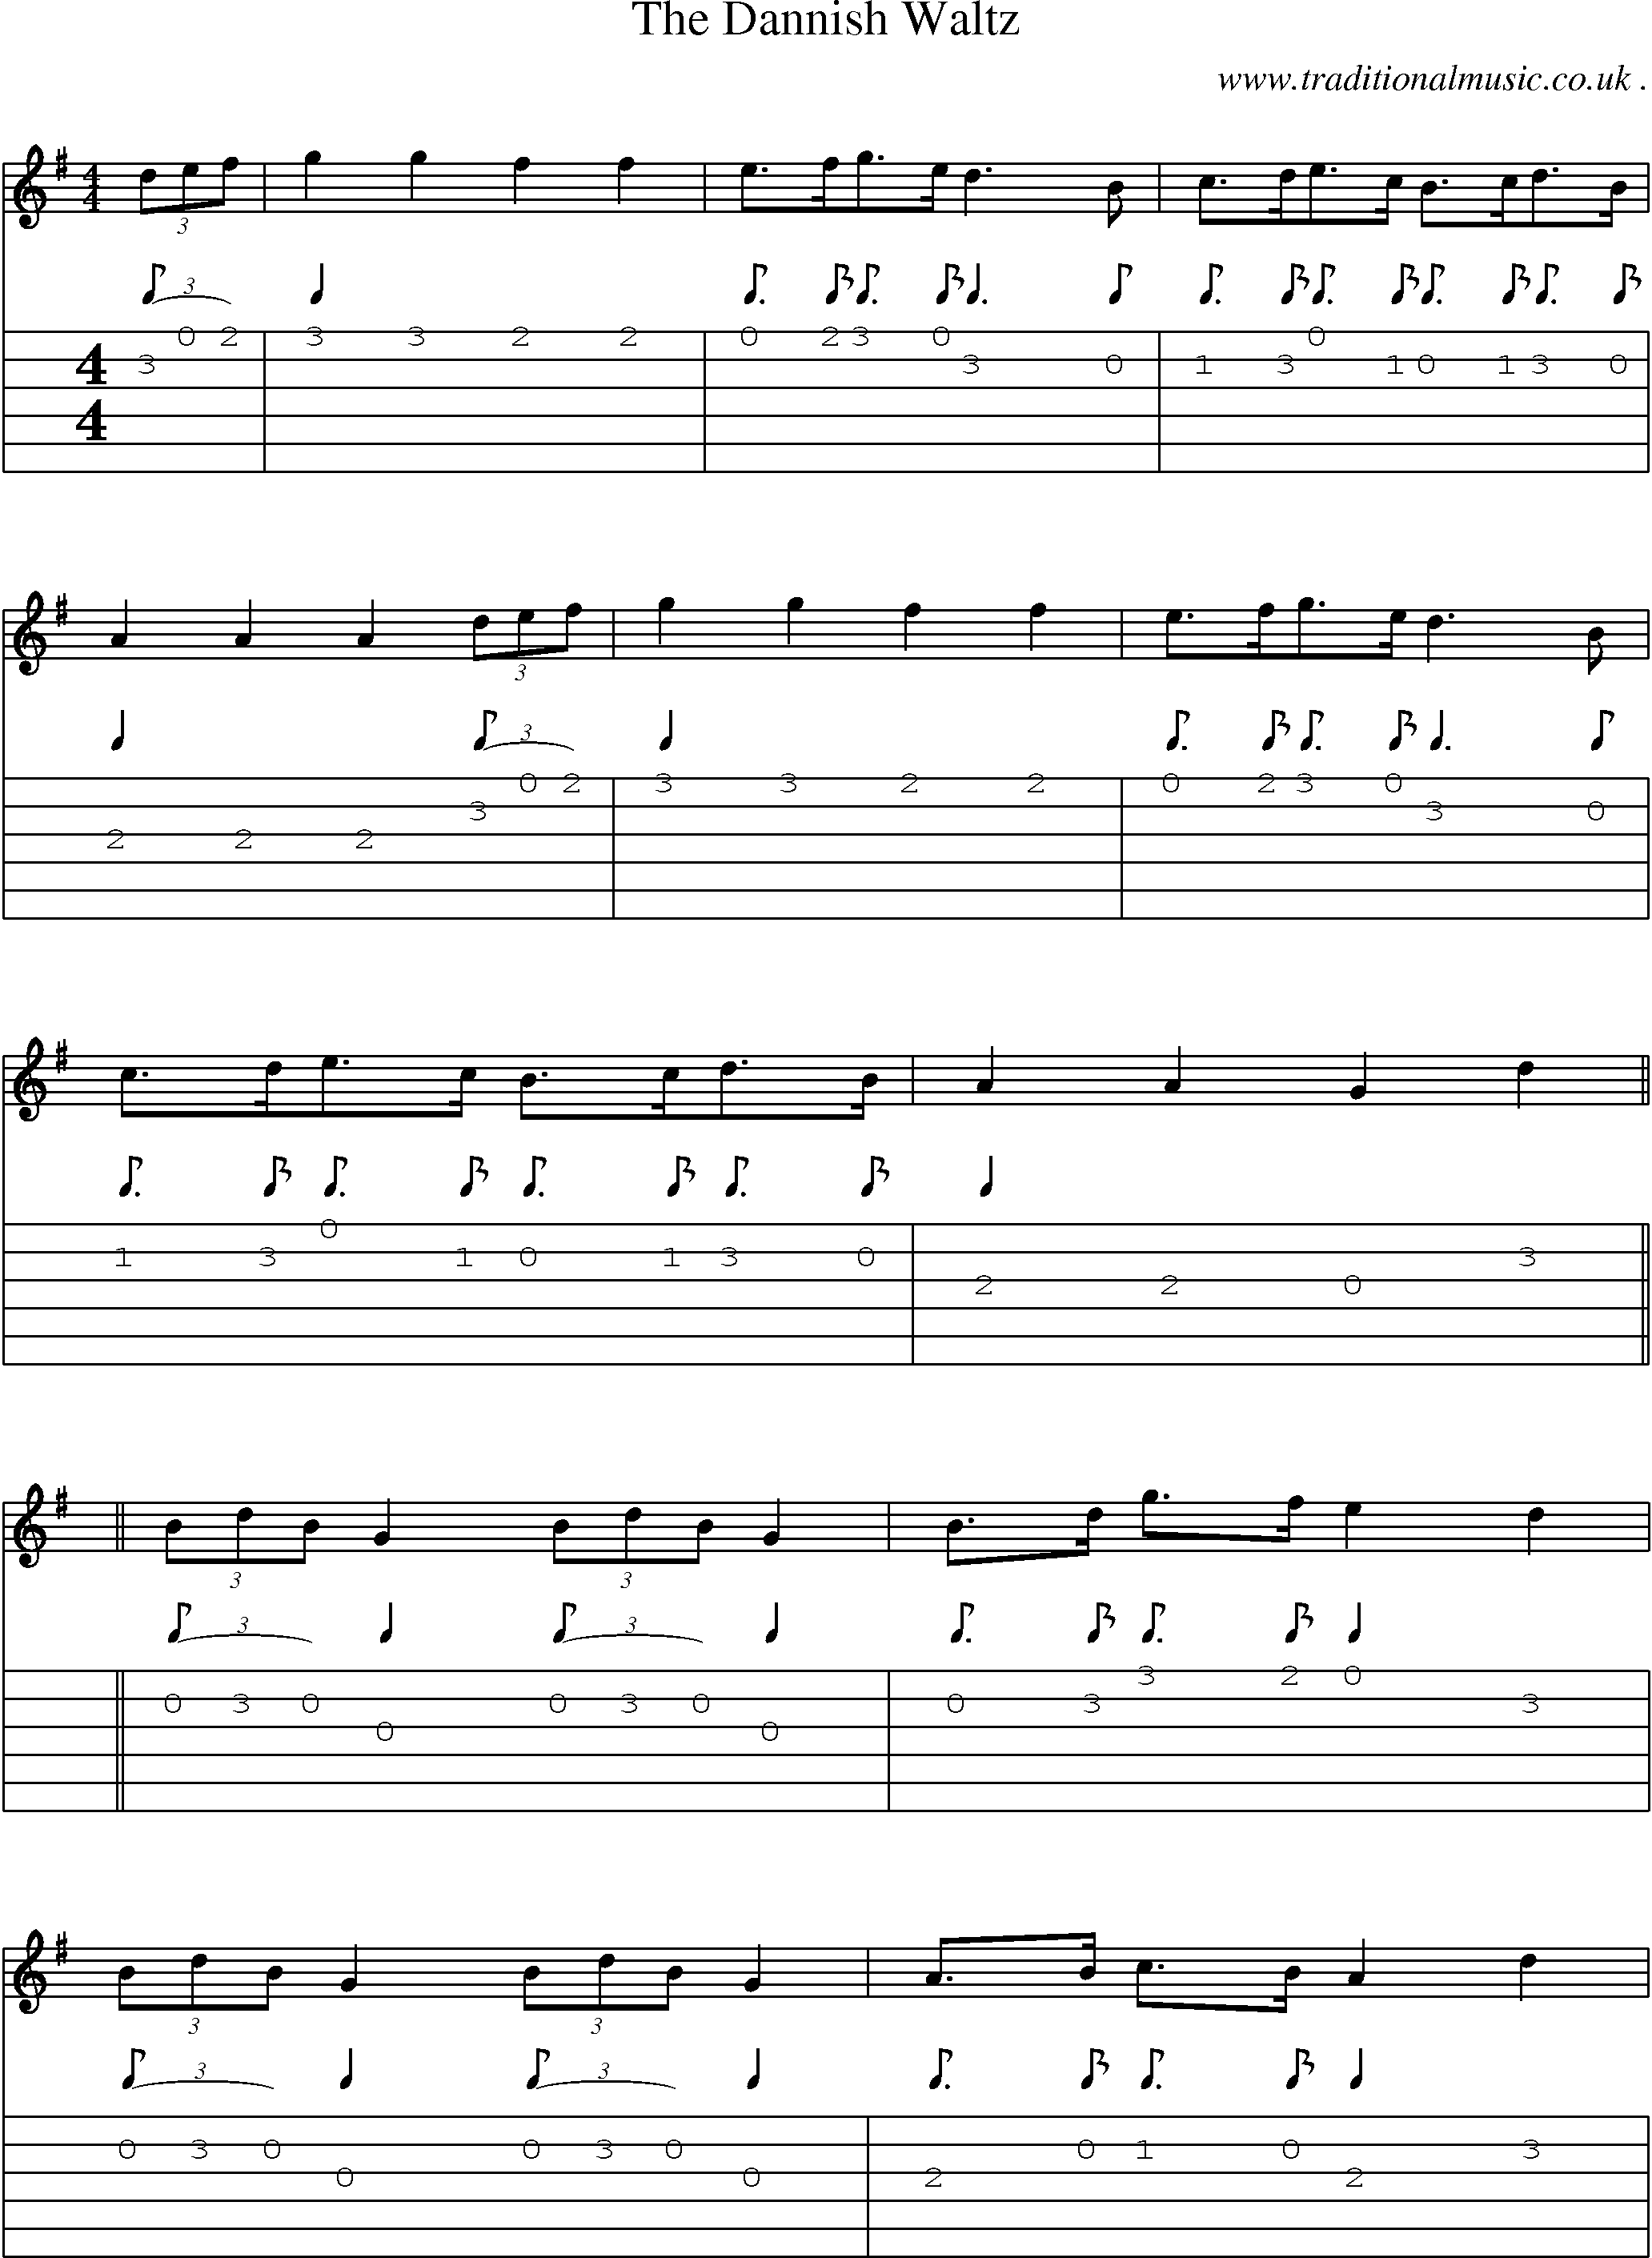 Sheet-Music and Guitar Tabs for The Dannish Waltz